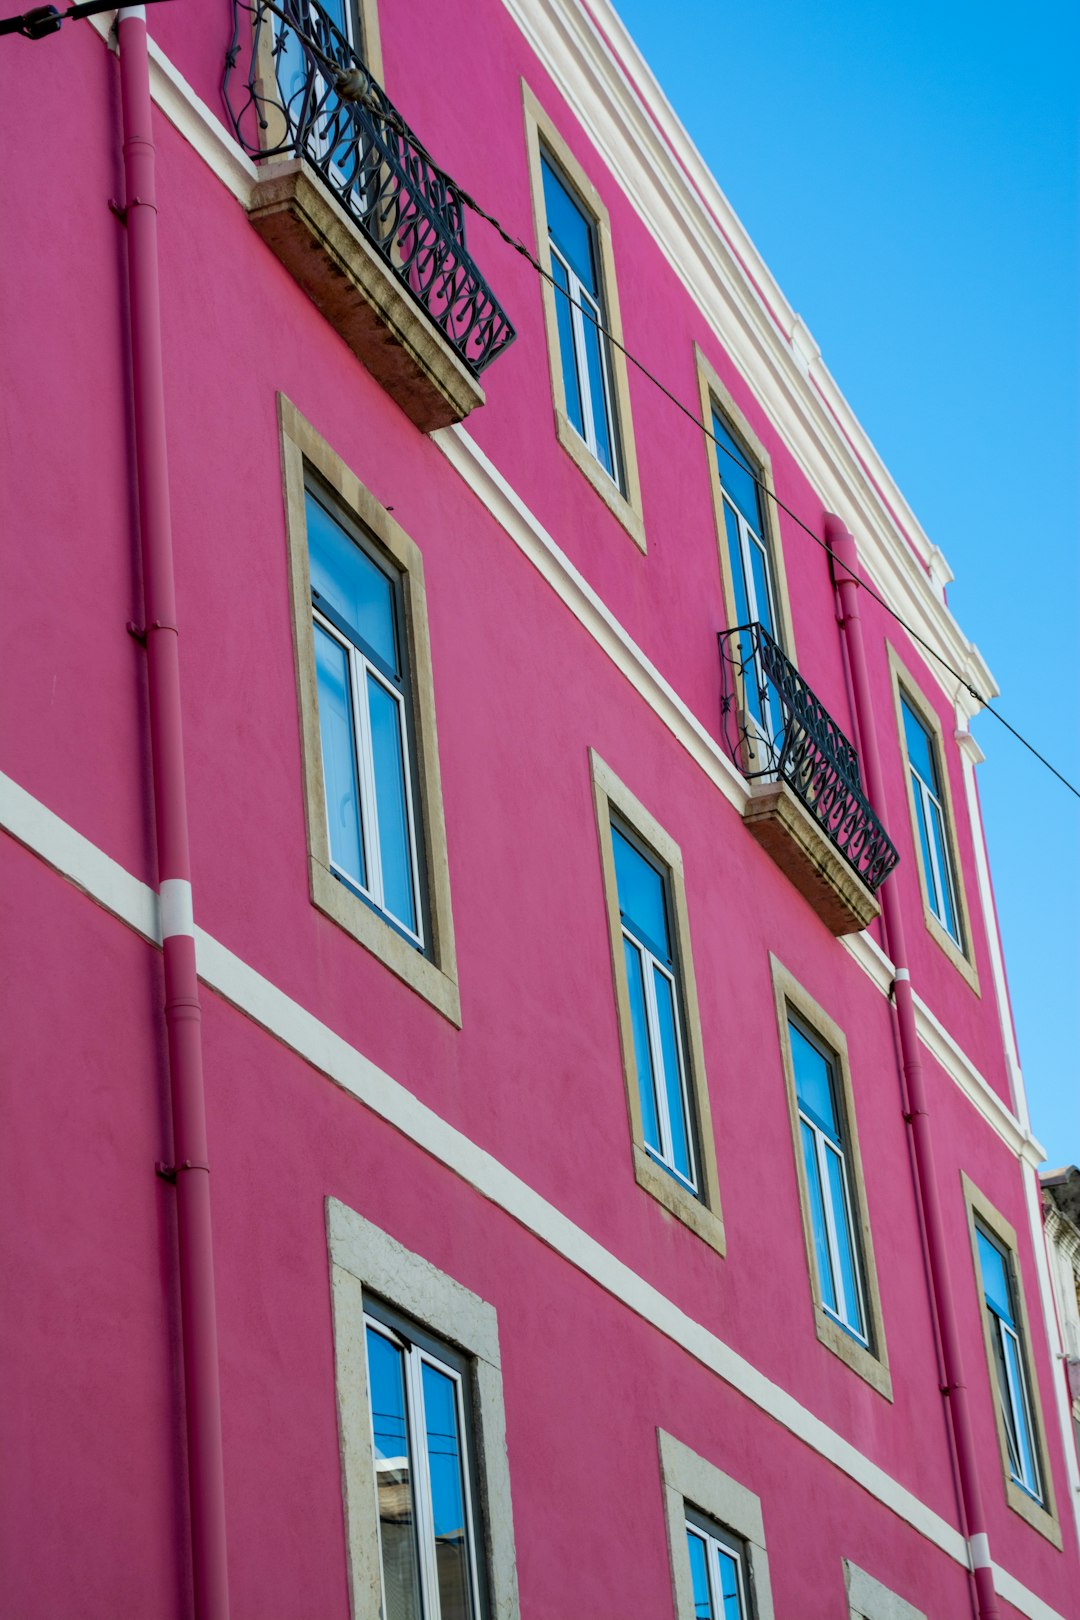 A pink house rising into the blue sky